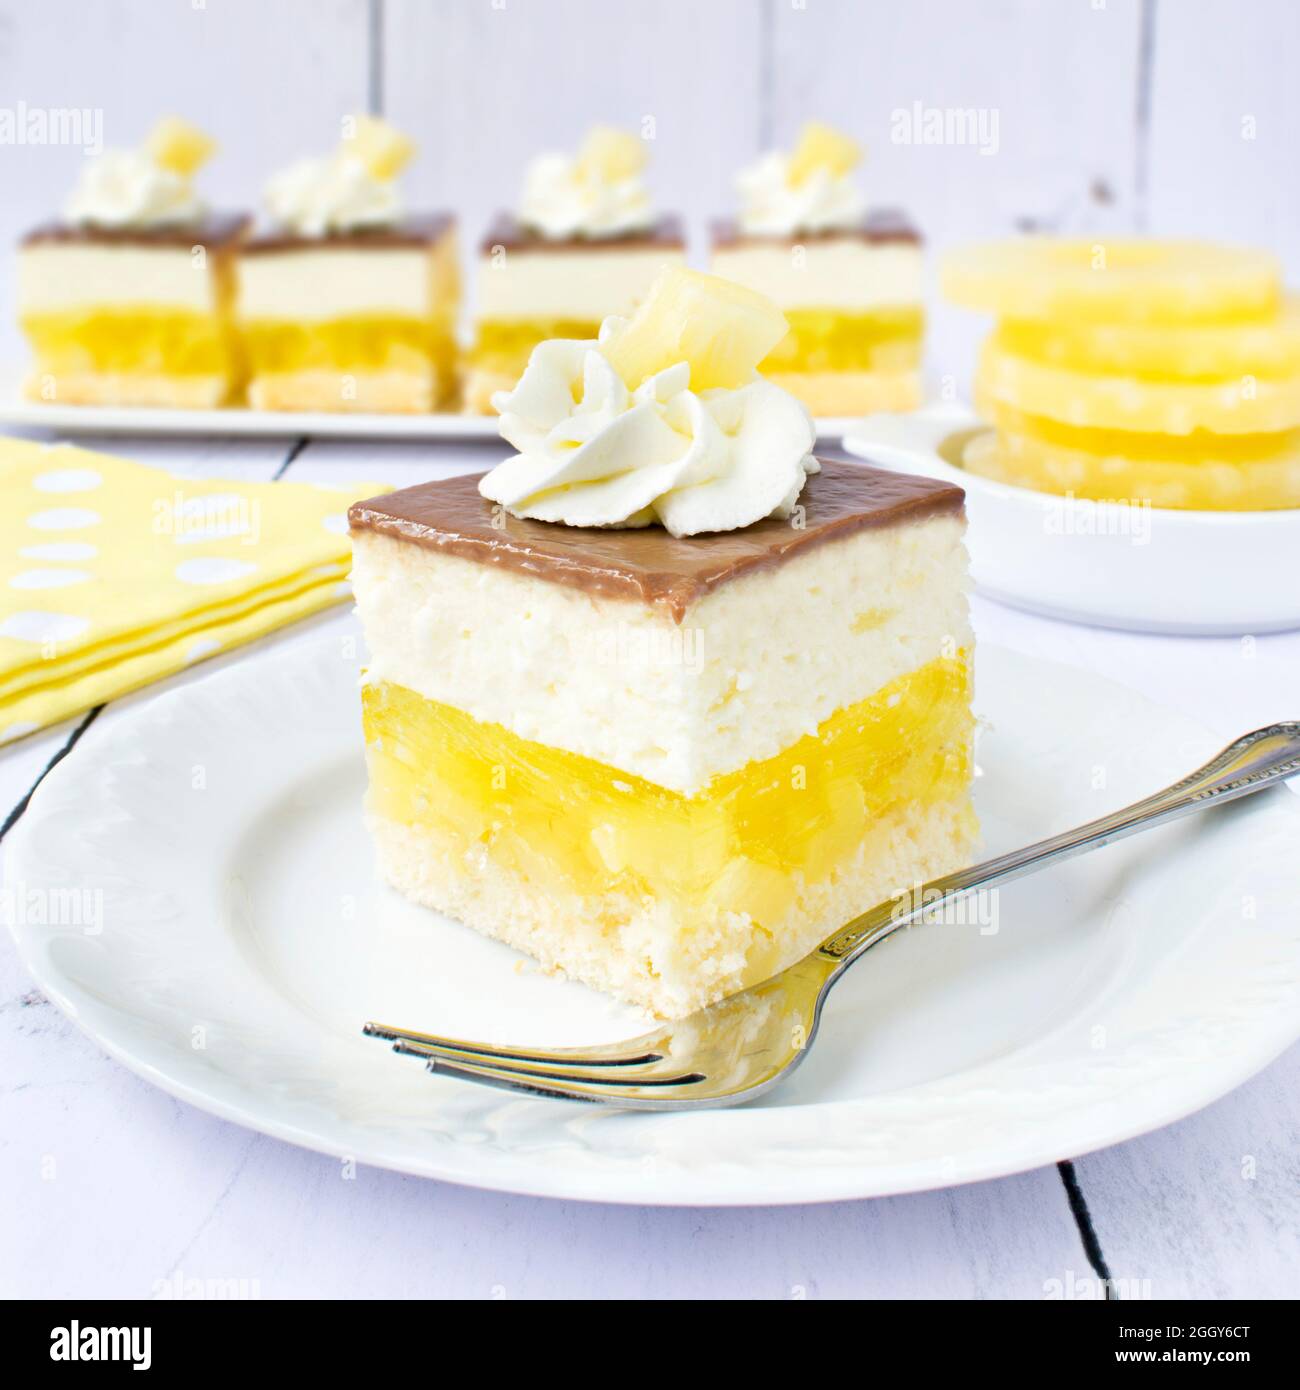 Homemade Pina Colada cake with jelly and fluffy coconut-pineapple foam. Stock Photo